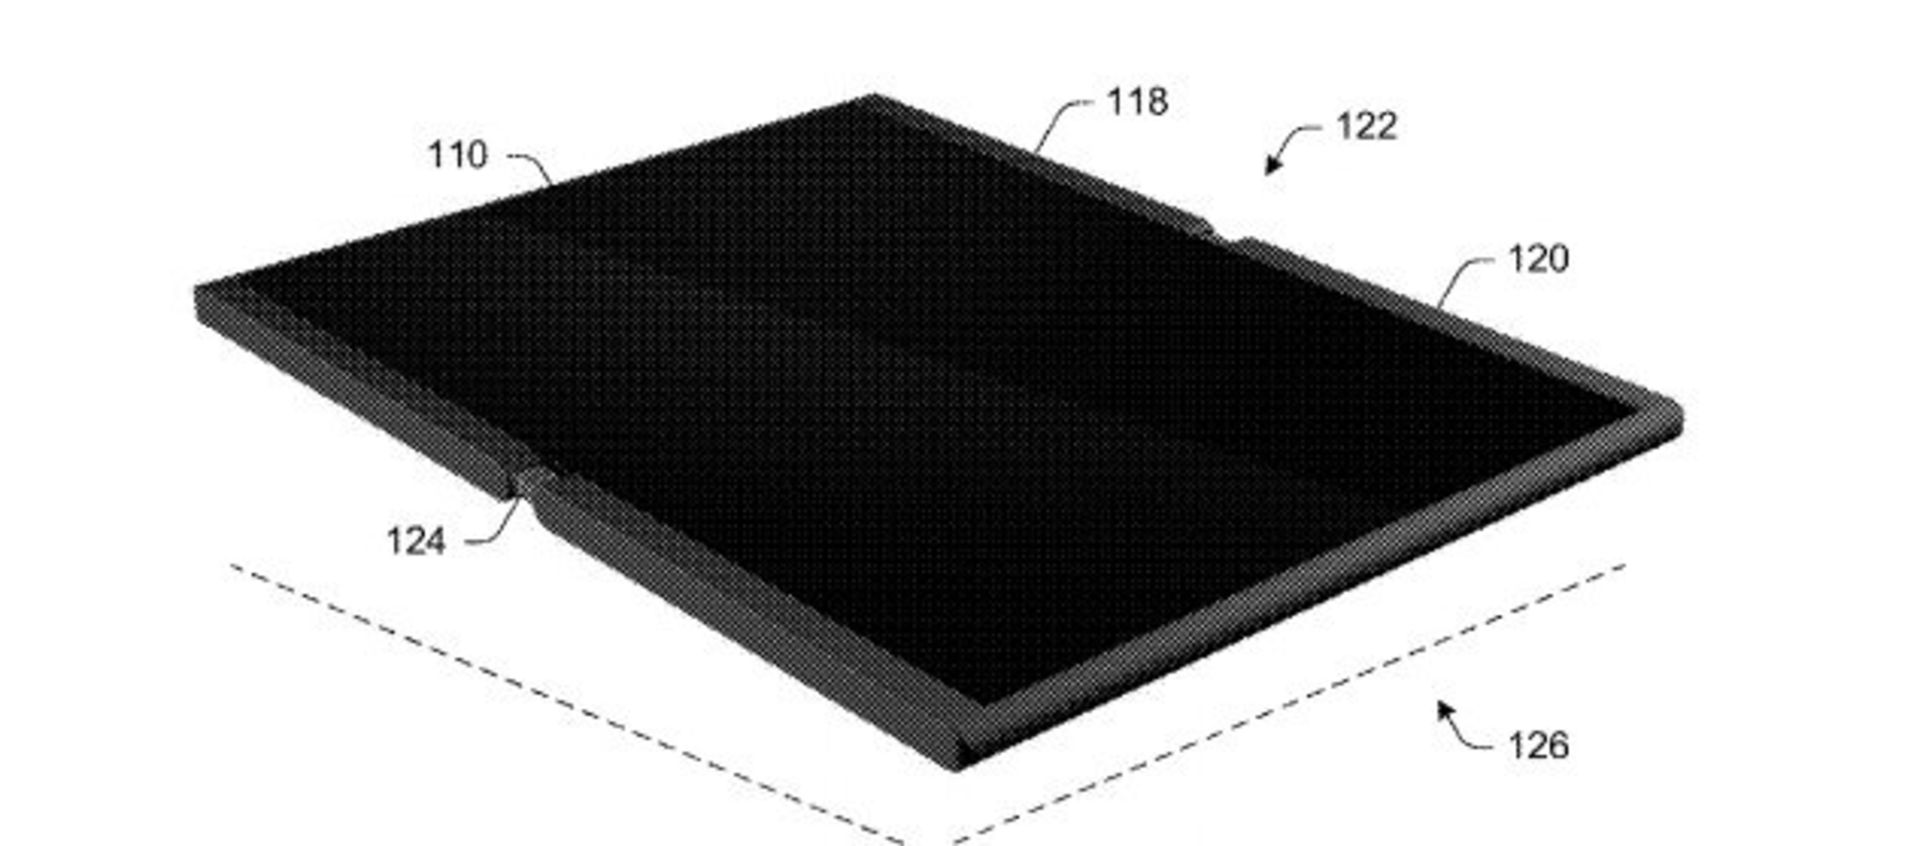 Foldable Tablet Patent